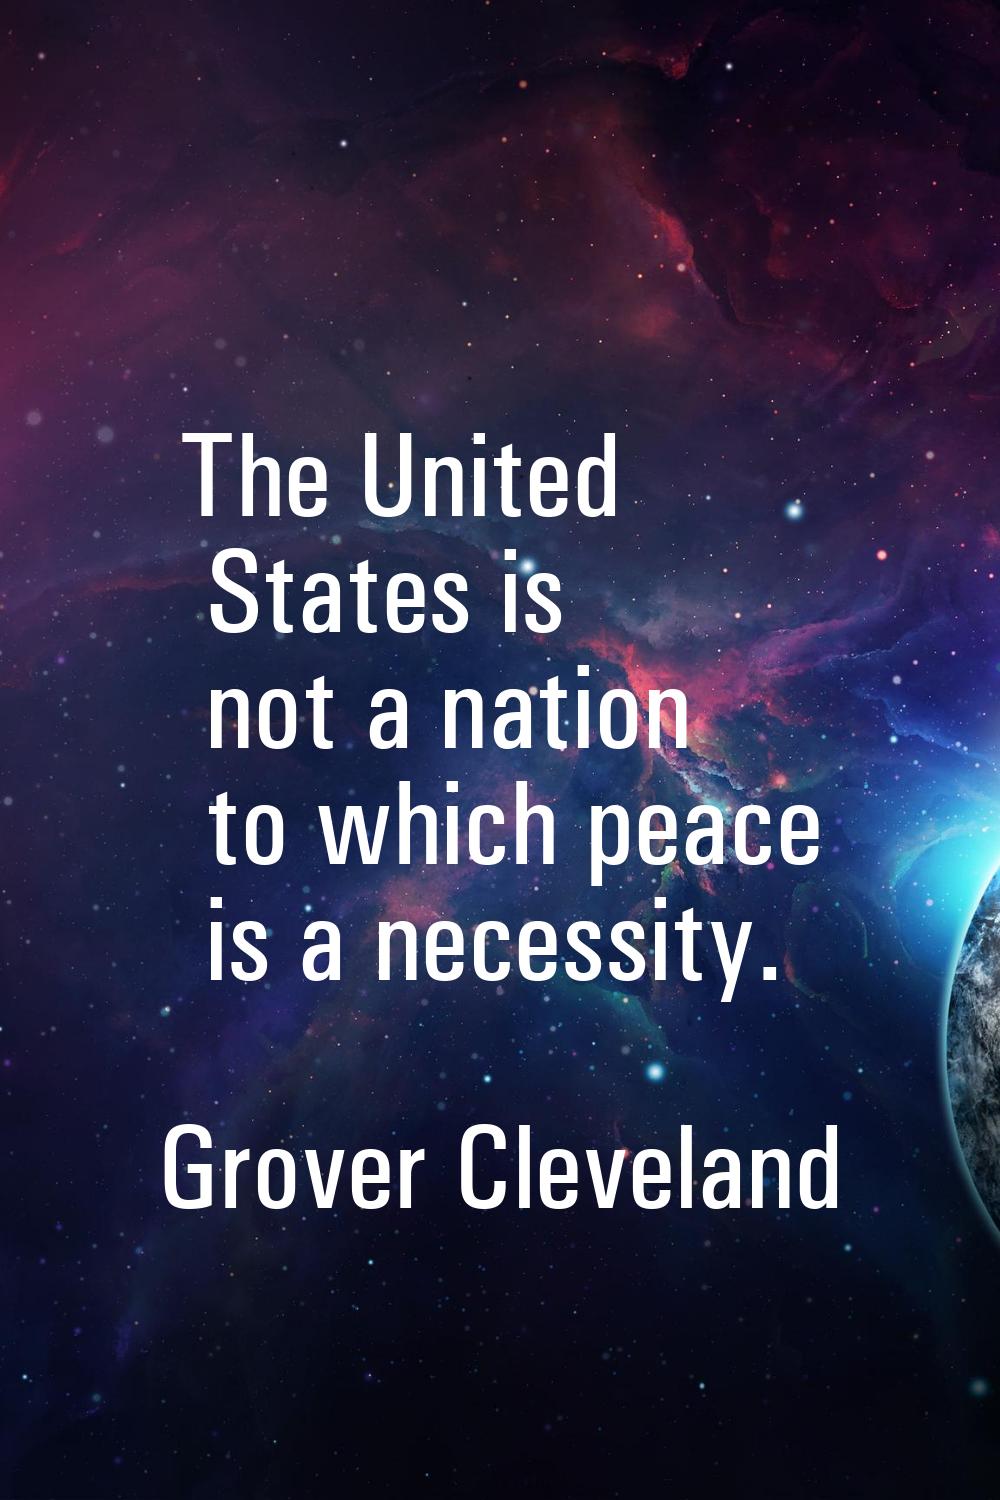 The United States is not a nation to which peace is a necessity.